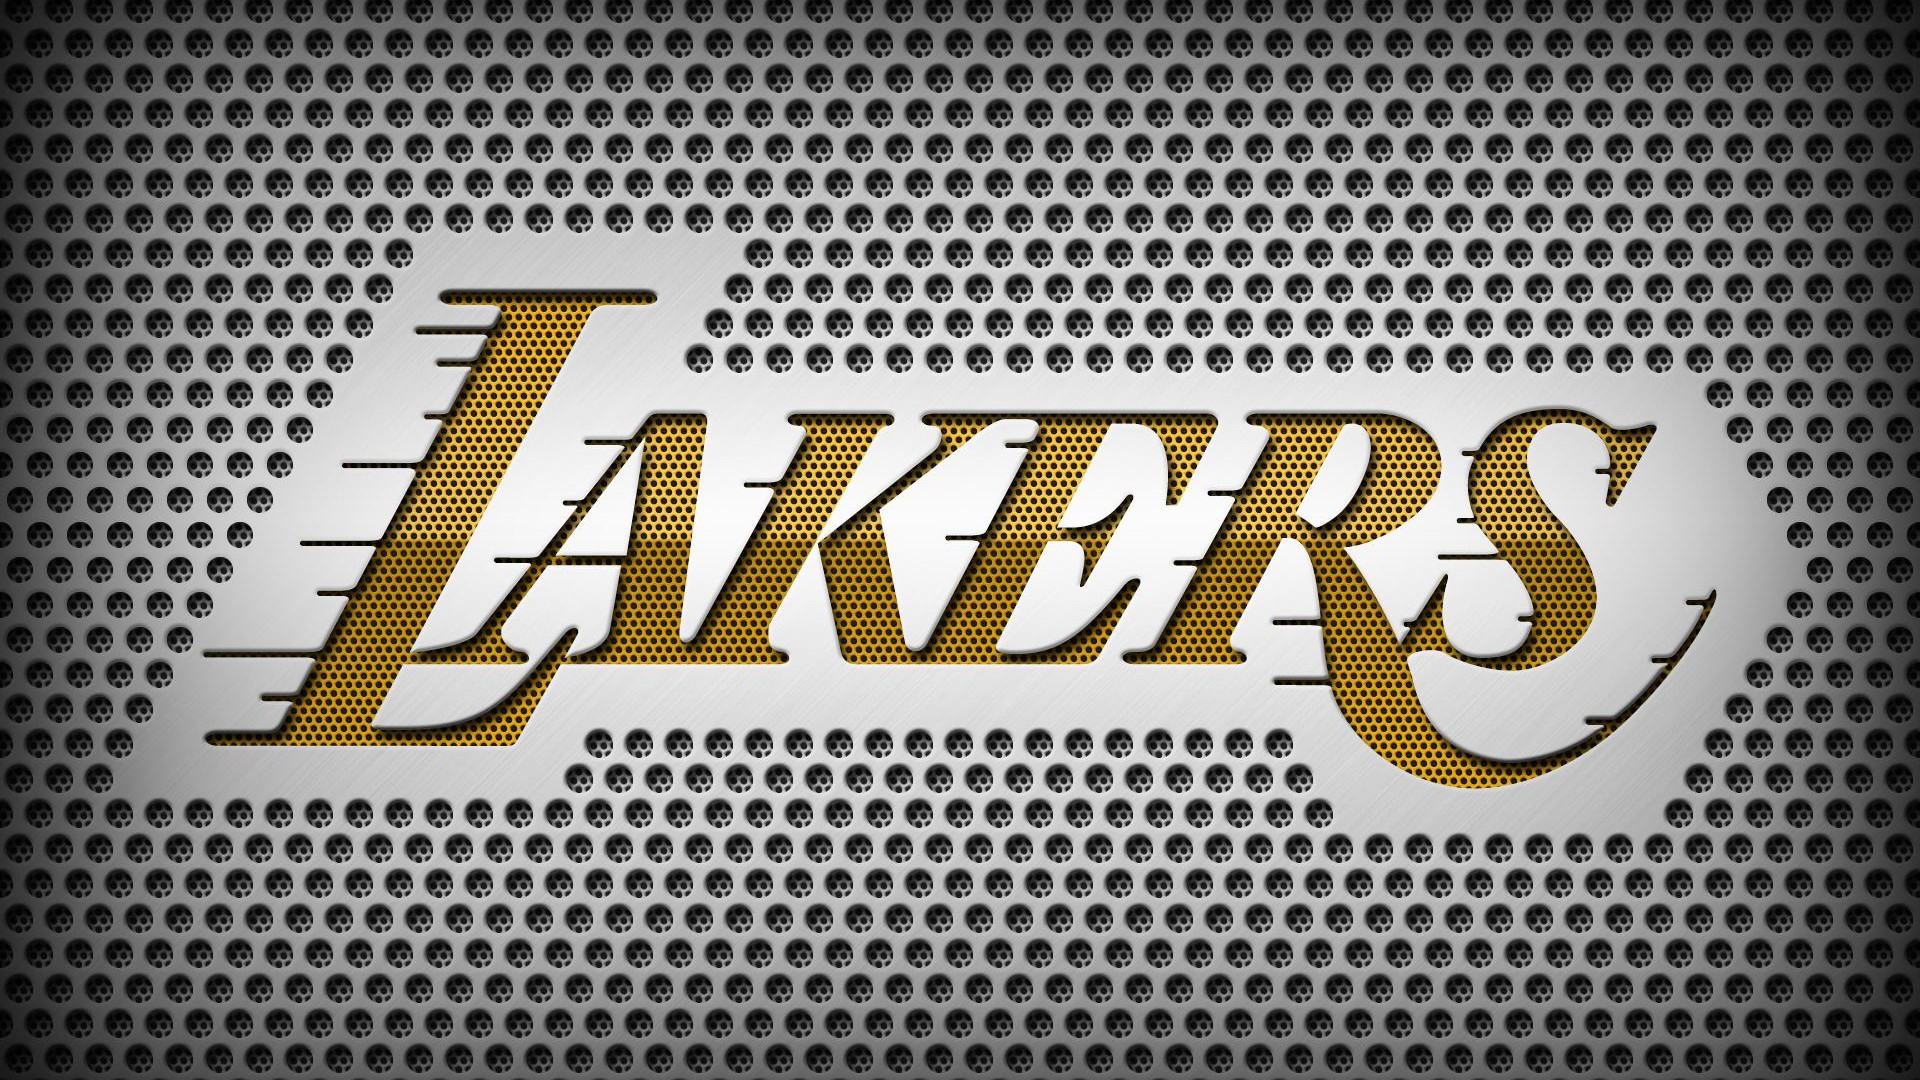 HD LA Lakers Backgrounds with image dimensions 1920x1080 pixel. You can make this wallpaper for your Desktop Computer Backgrounds, Windows or Mac Screensavers, iPhone Lock screen, Tablet or Android and another Mobile Phone device